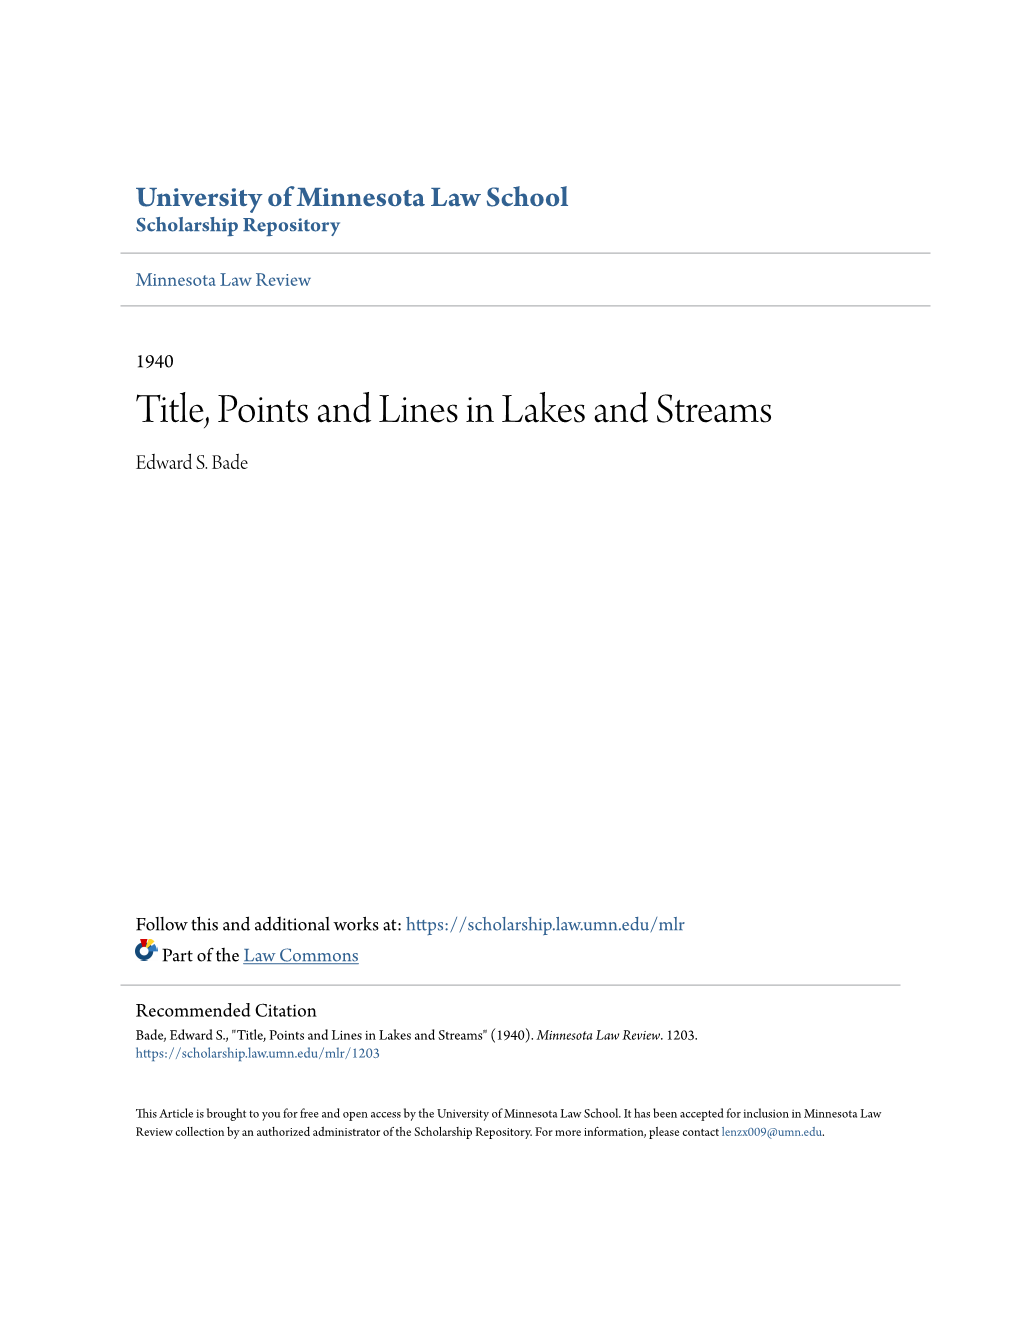 Title, Points and Lines in Lakes and Streams Edward S